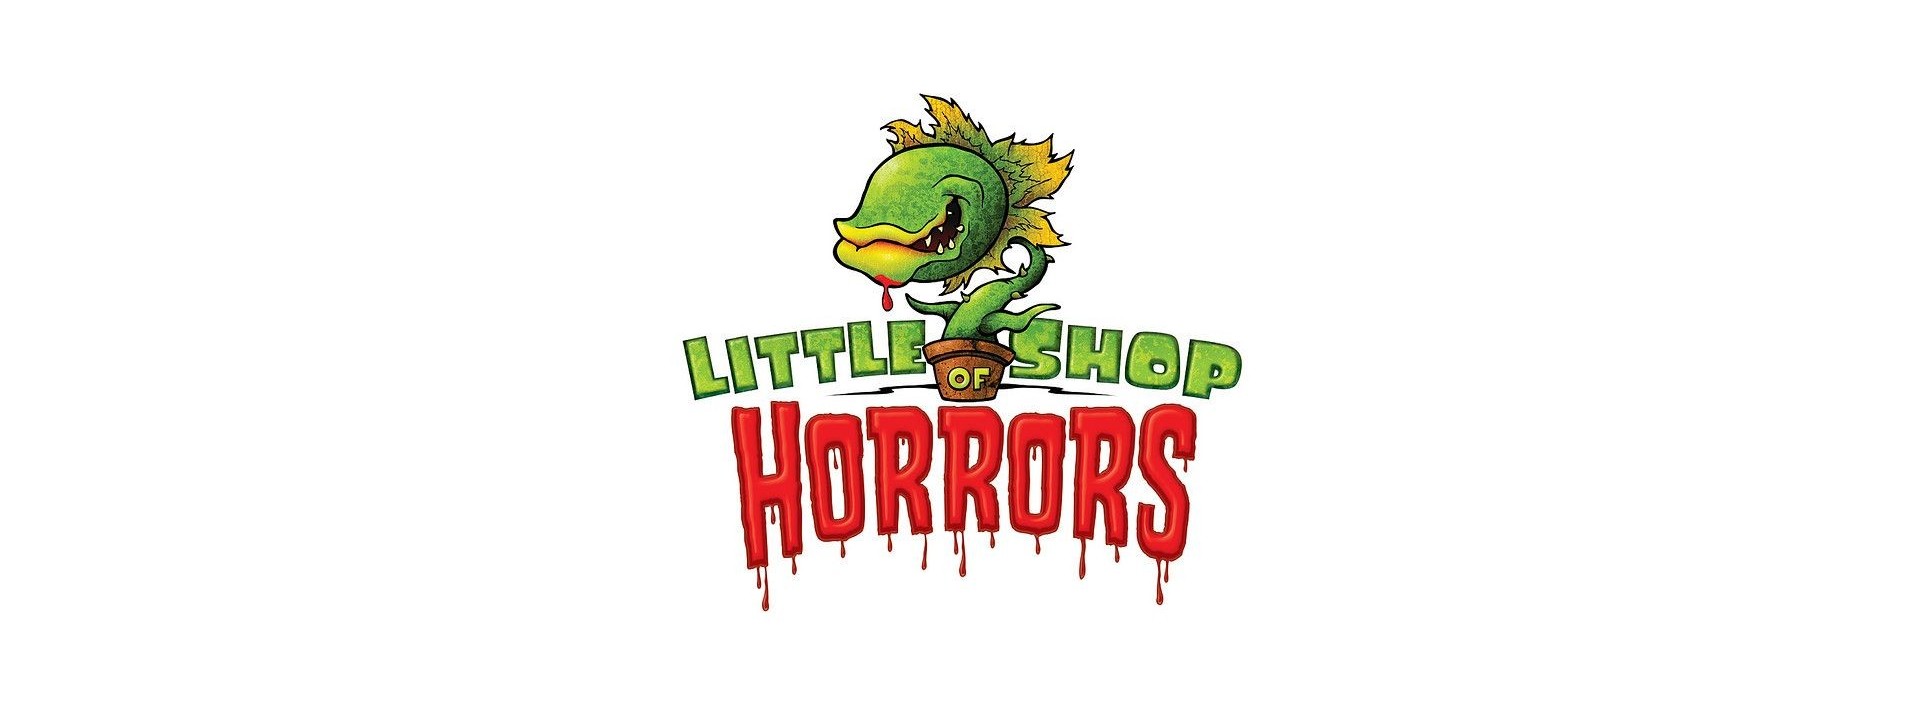 THE LITTLE SHOP OF HORRORS